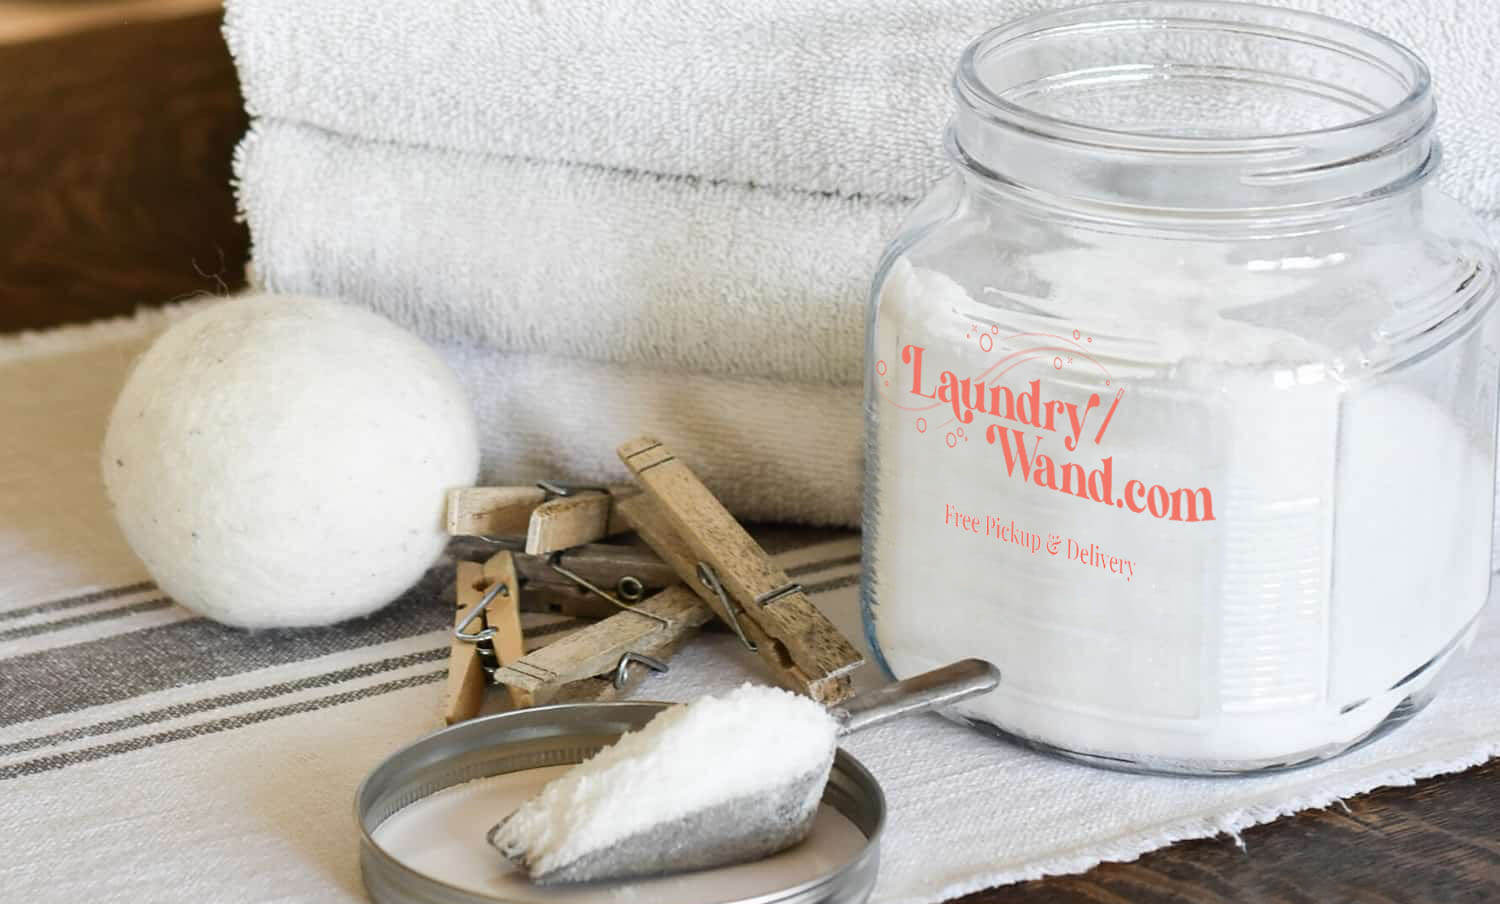 Zero packaging, Homemade eco-friendly detergent offered at Laundy Wand Laundromat.